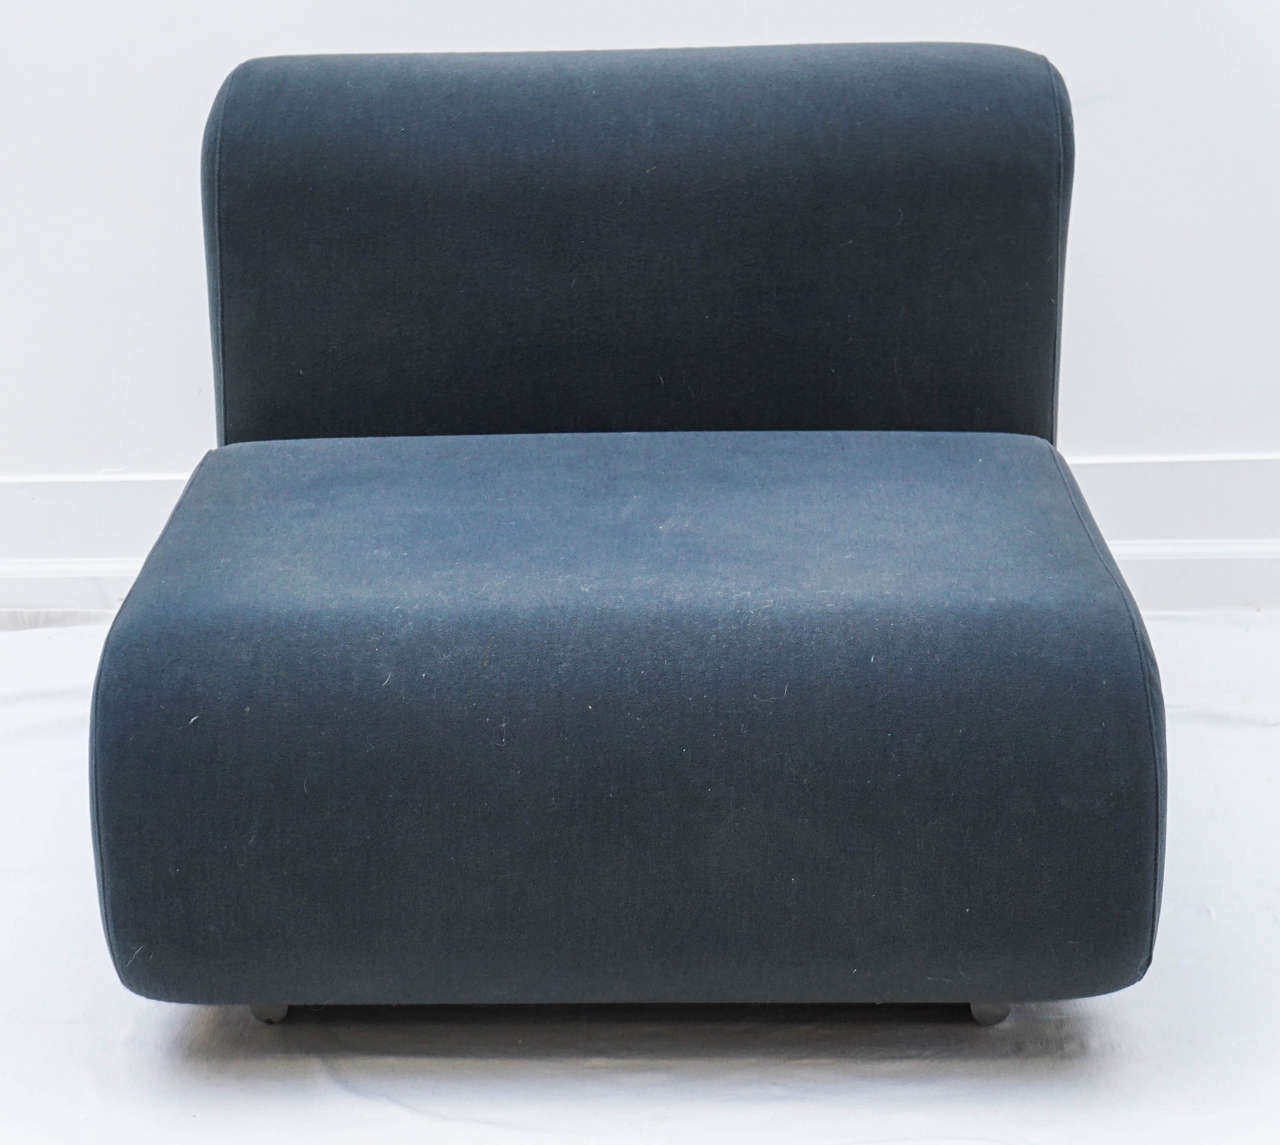 perfect little modern seat. designed by Kazuhide Takahama for Knoll
comfort and style. fabric could be used as is with a cleaning. update with Pucci or Larsen fabric and its crazy cool!